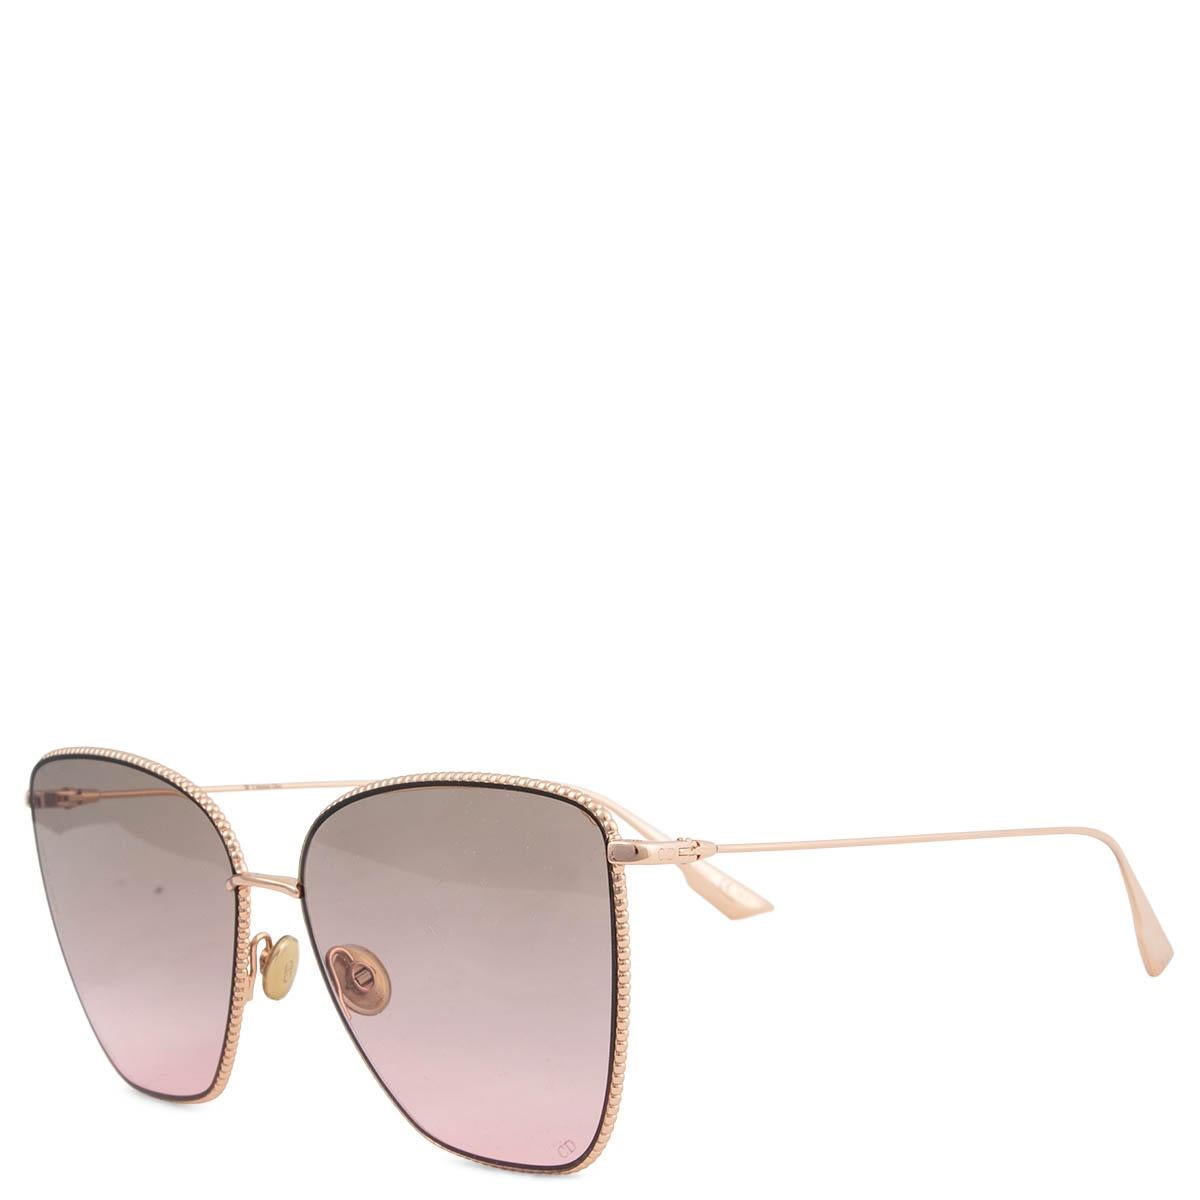 100% authentic Christian Dior Society 1 DDB/86 sunglasses in rose-gold metal and brown/pink gradient lenses. Have been worn and are in excellent condition. Come with Linda Farrow case. 

Measurements
Model	DDB86
Width	14cm (5.5in)
Height	5.5cm